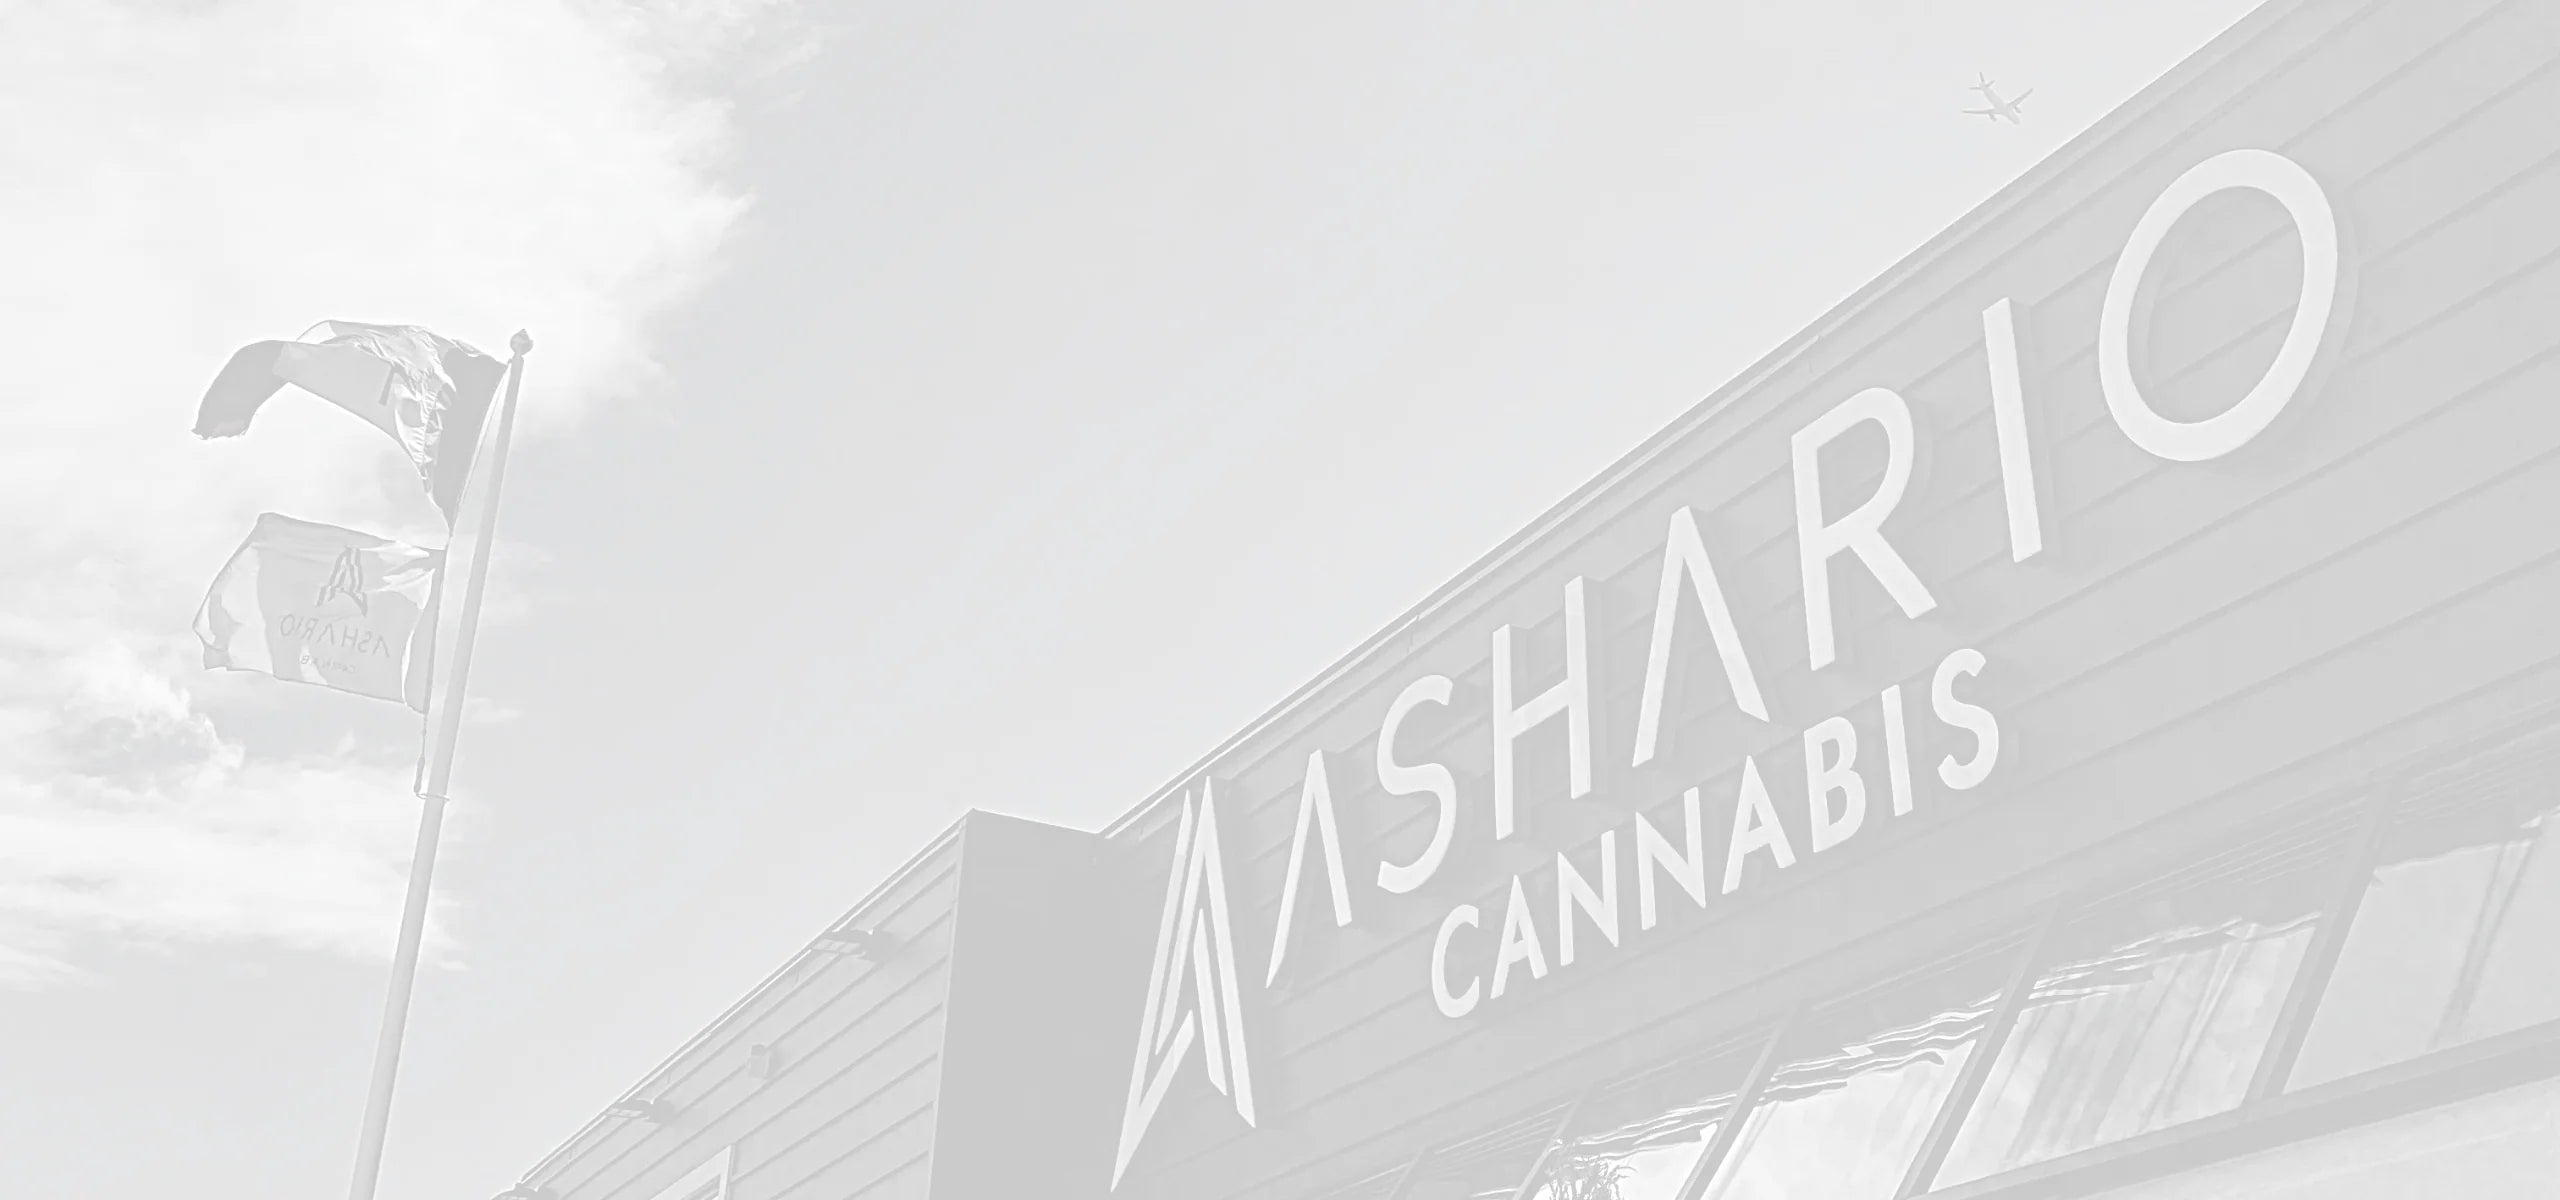 Discover why Ashario Cannabis stands out as the top weed shop in Canada. With a commitment to quality, customer service, and community, Ashario offers a premium cannabis experience like no other.